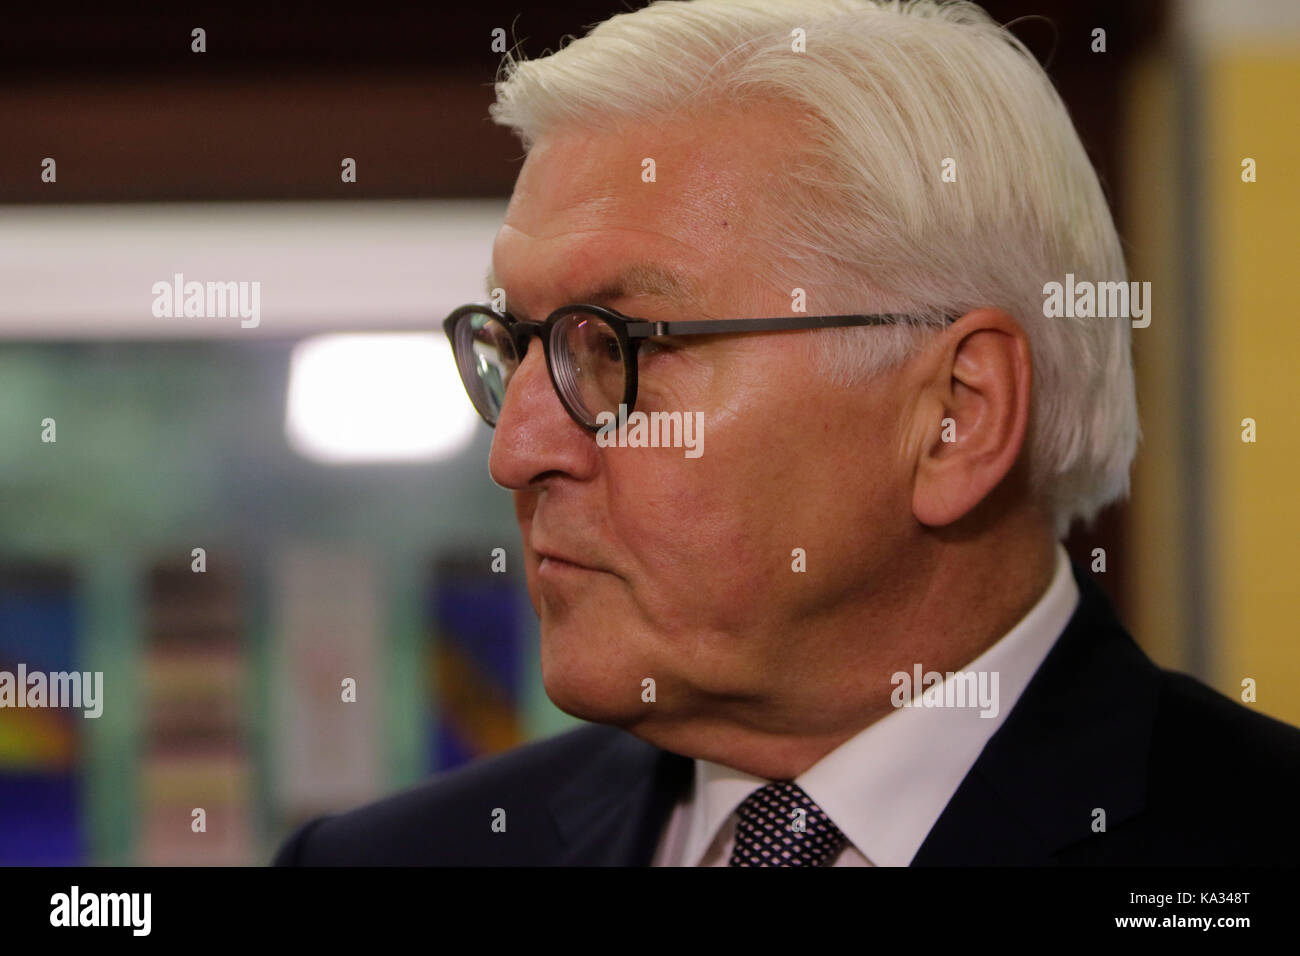 Berlin, Germany. 24th Sep, 2017. Close-up of Frank-Walter Steinmeier. The German President Frank-Walter Steinmeier and his wife Elke Büdenbender cast their votes for the German General Election in the Nord-Grundschule in Berlin Zehlendorf. Credit: Michael Debets/Pacific Press/Alamy Live News Stock Photo